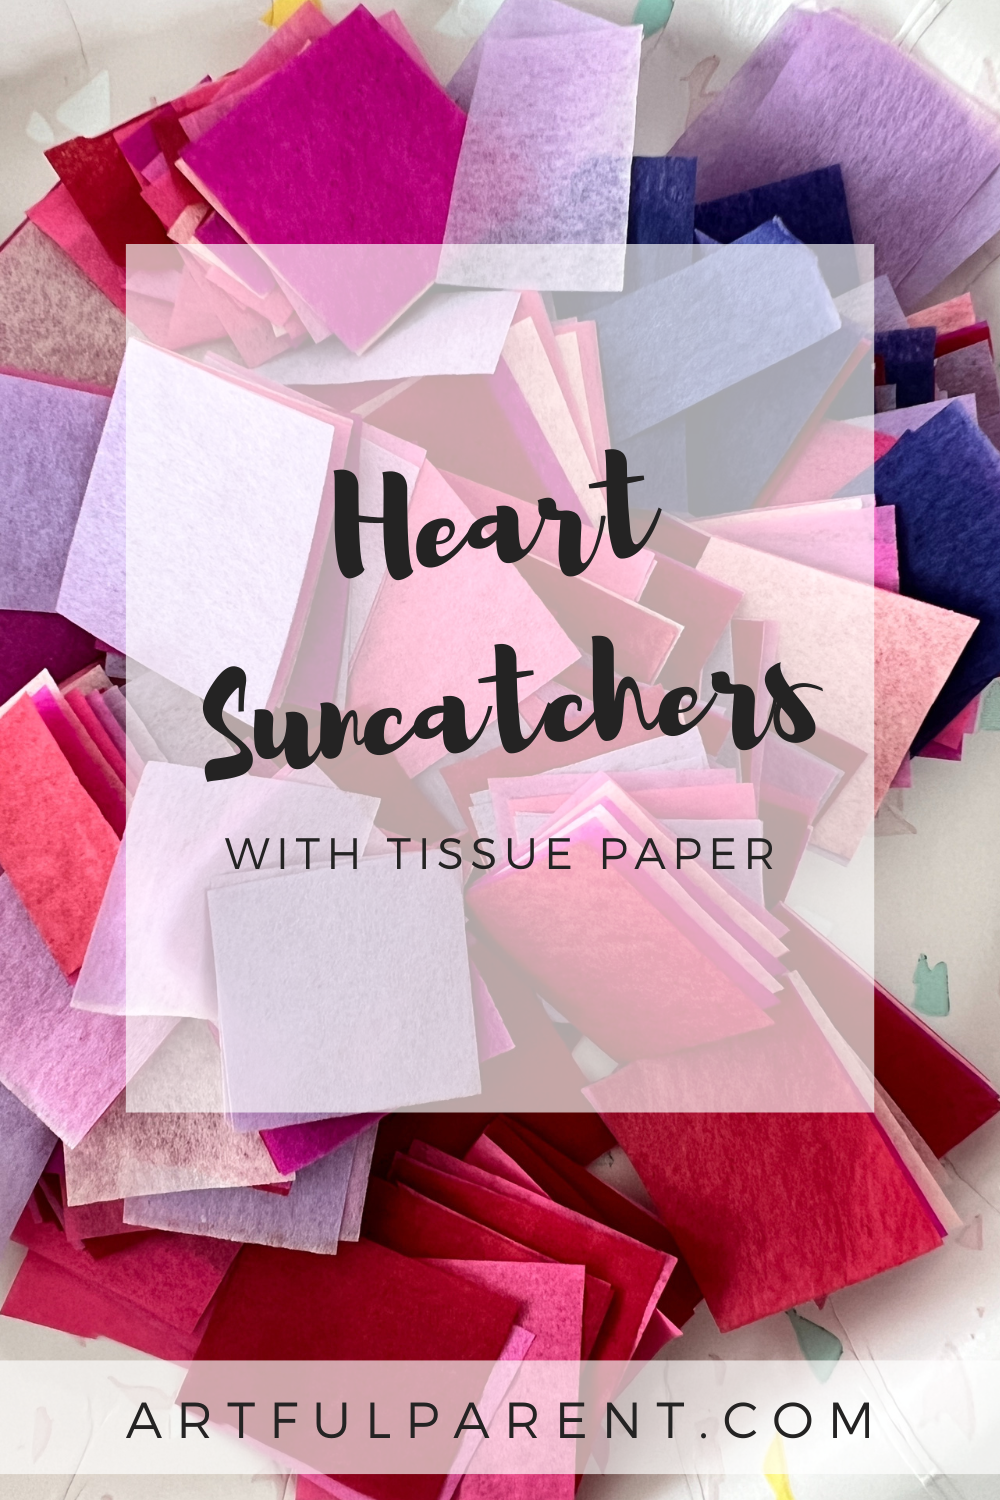 How to Make a Heart Suncatcher with Tissue Paper